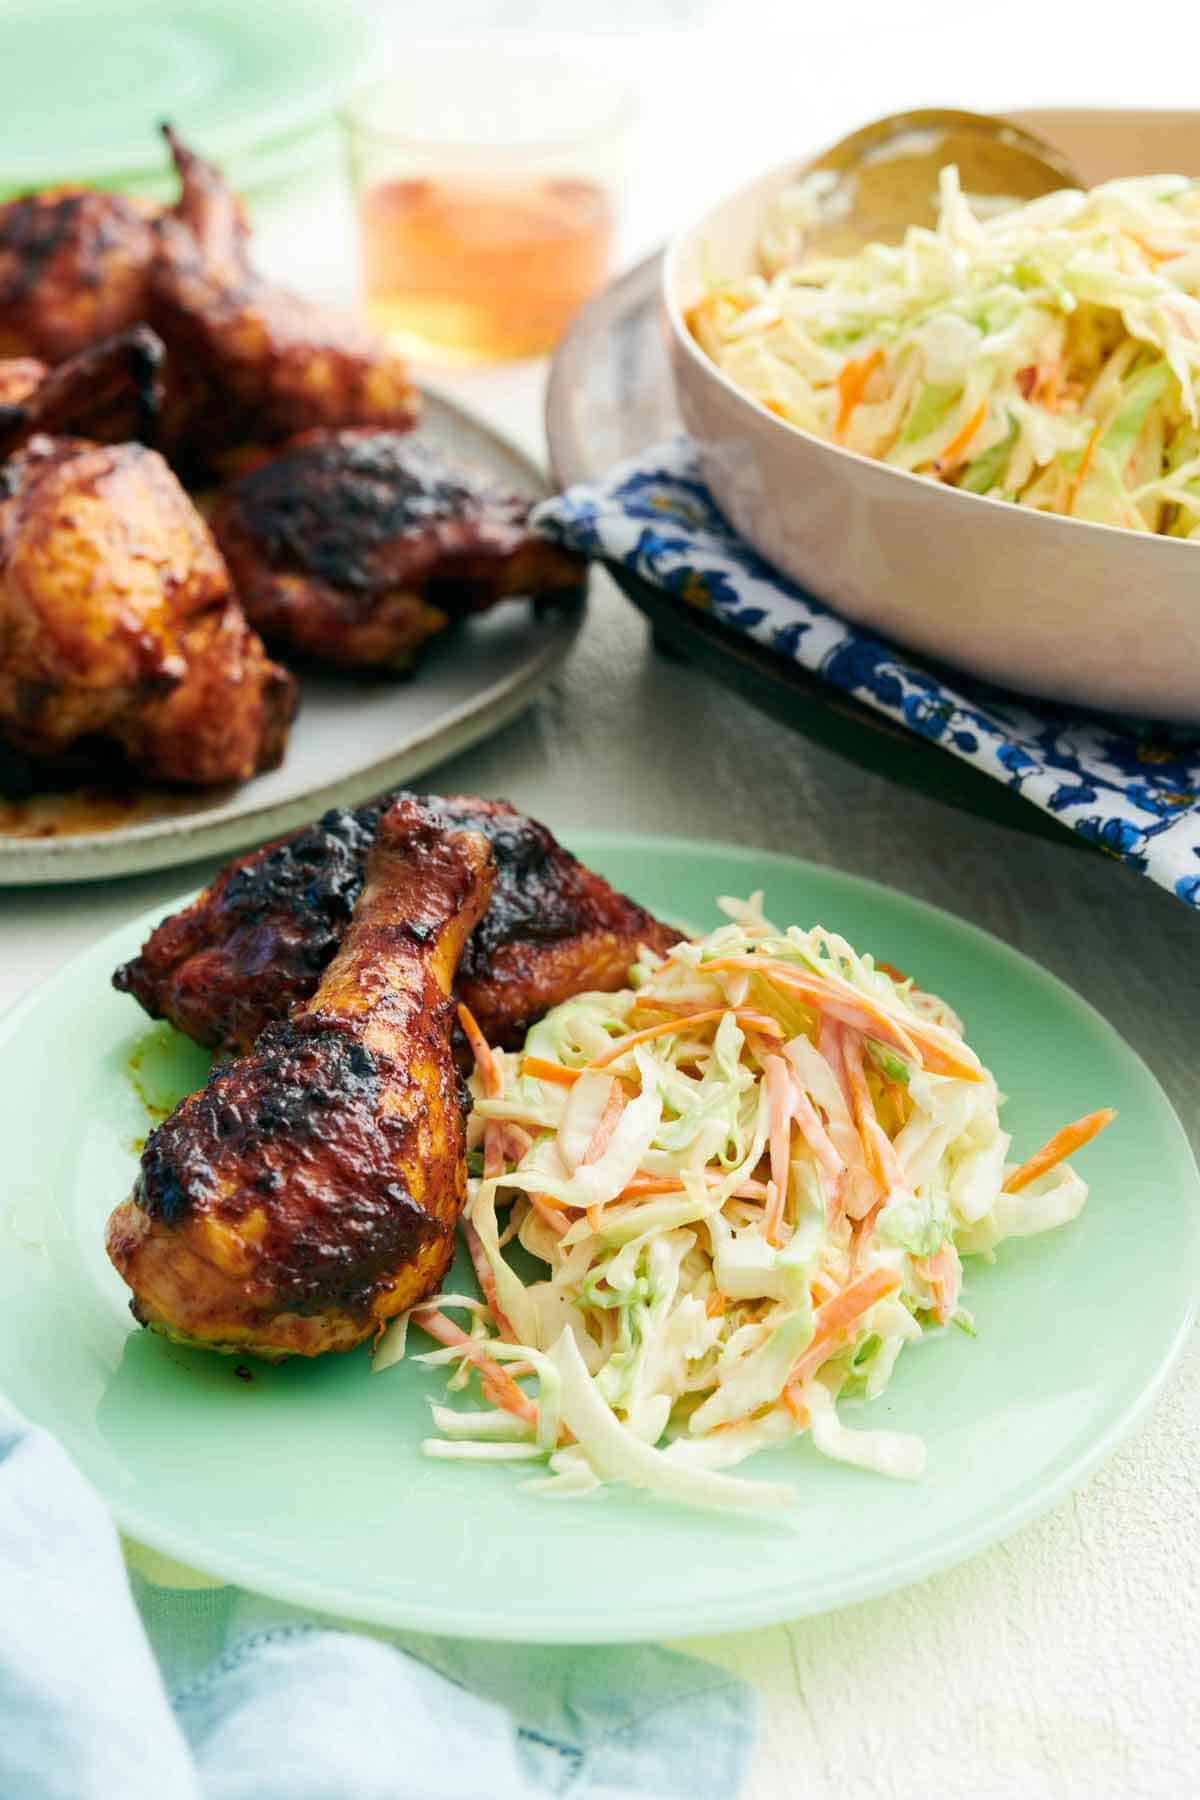 A plate with coleslaw and grilled chicken drumsticks. More chicken and coleslaw in the background.